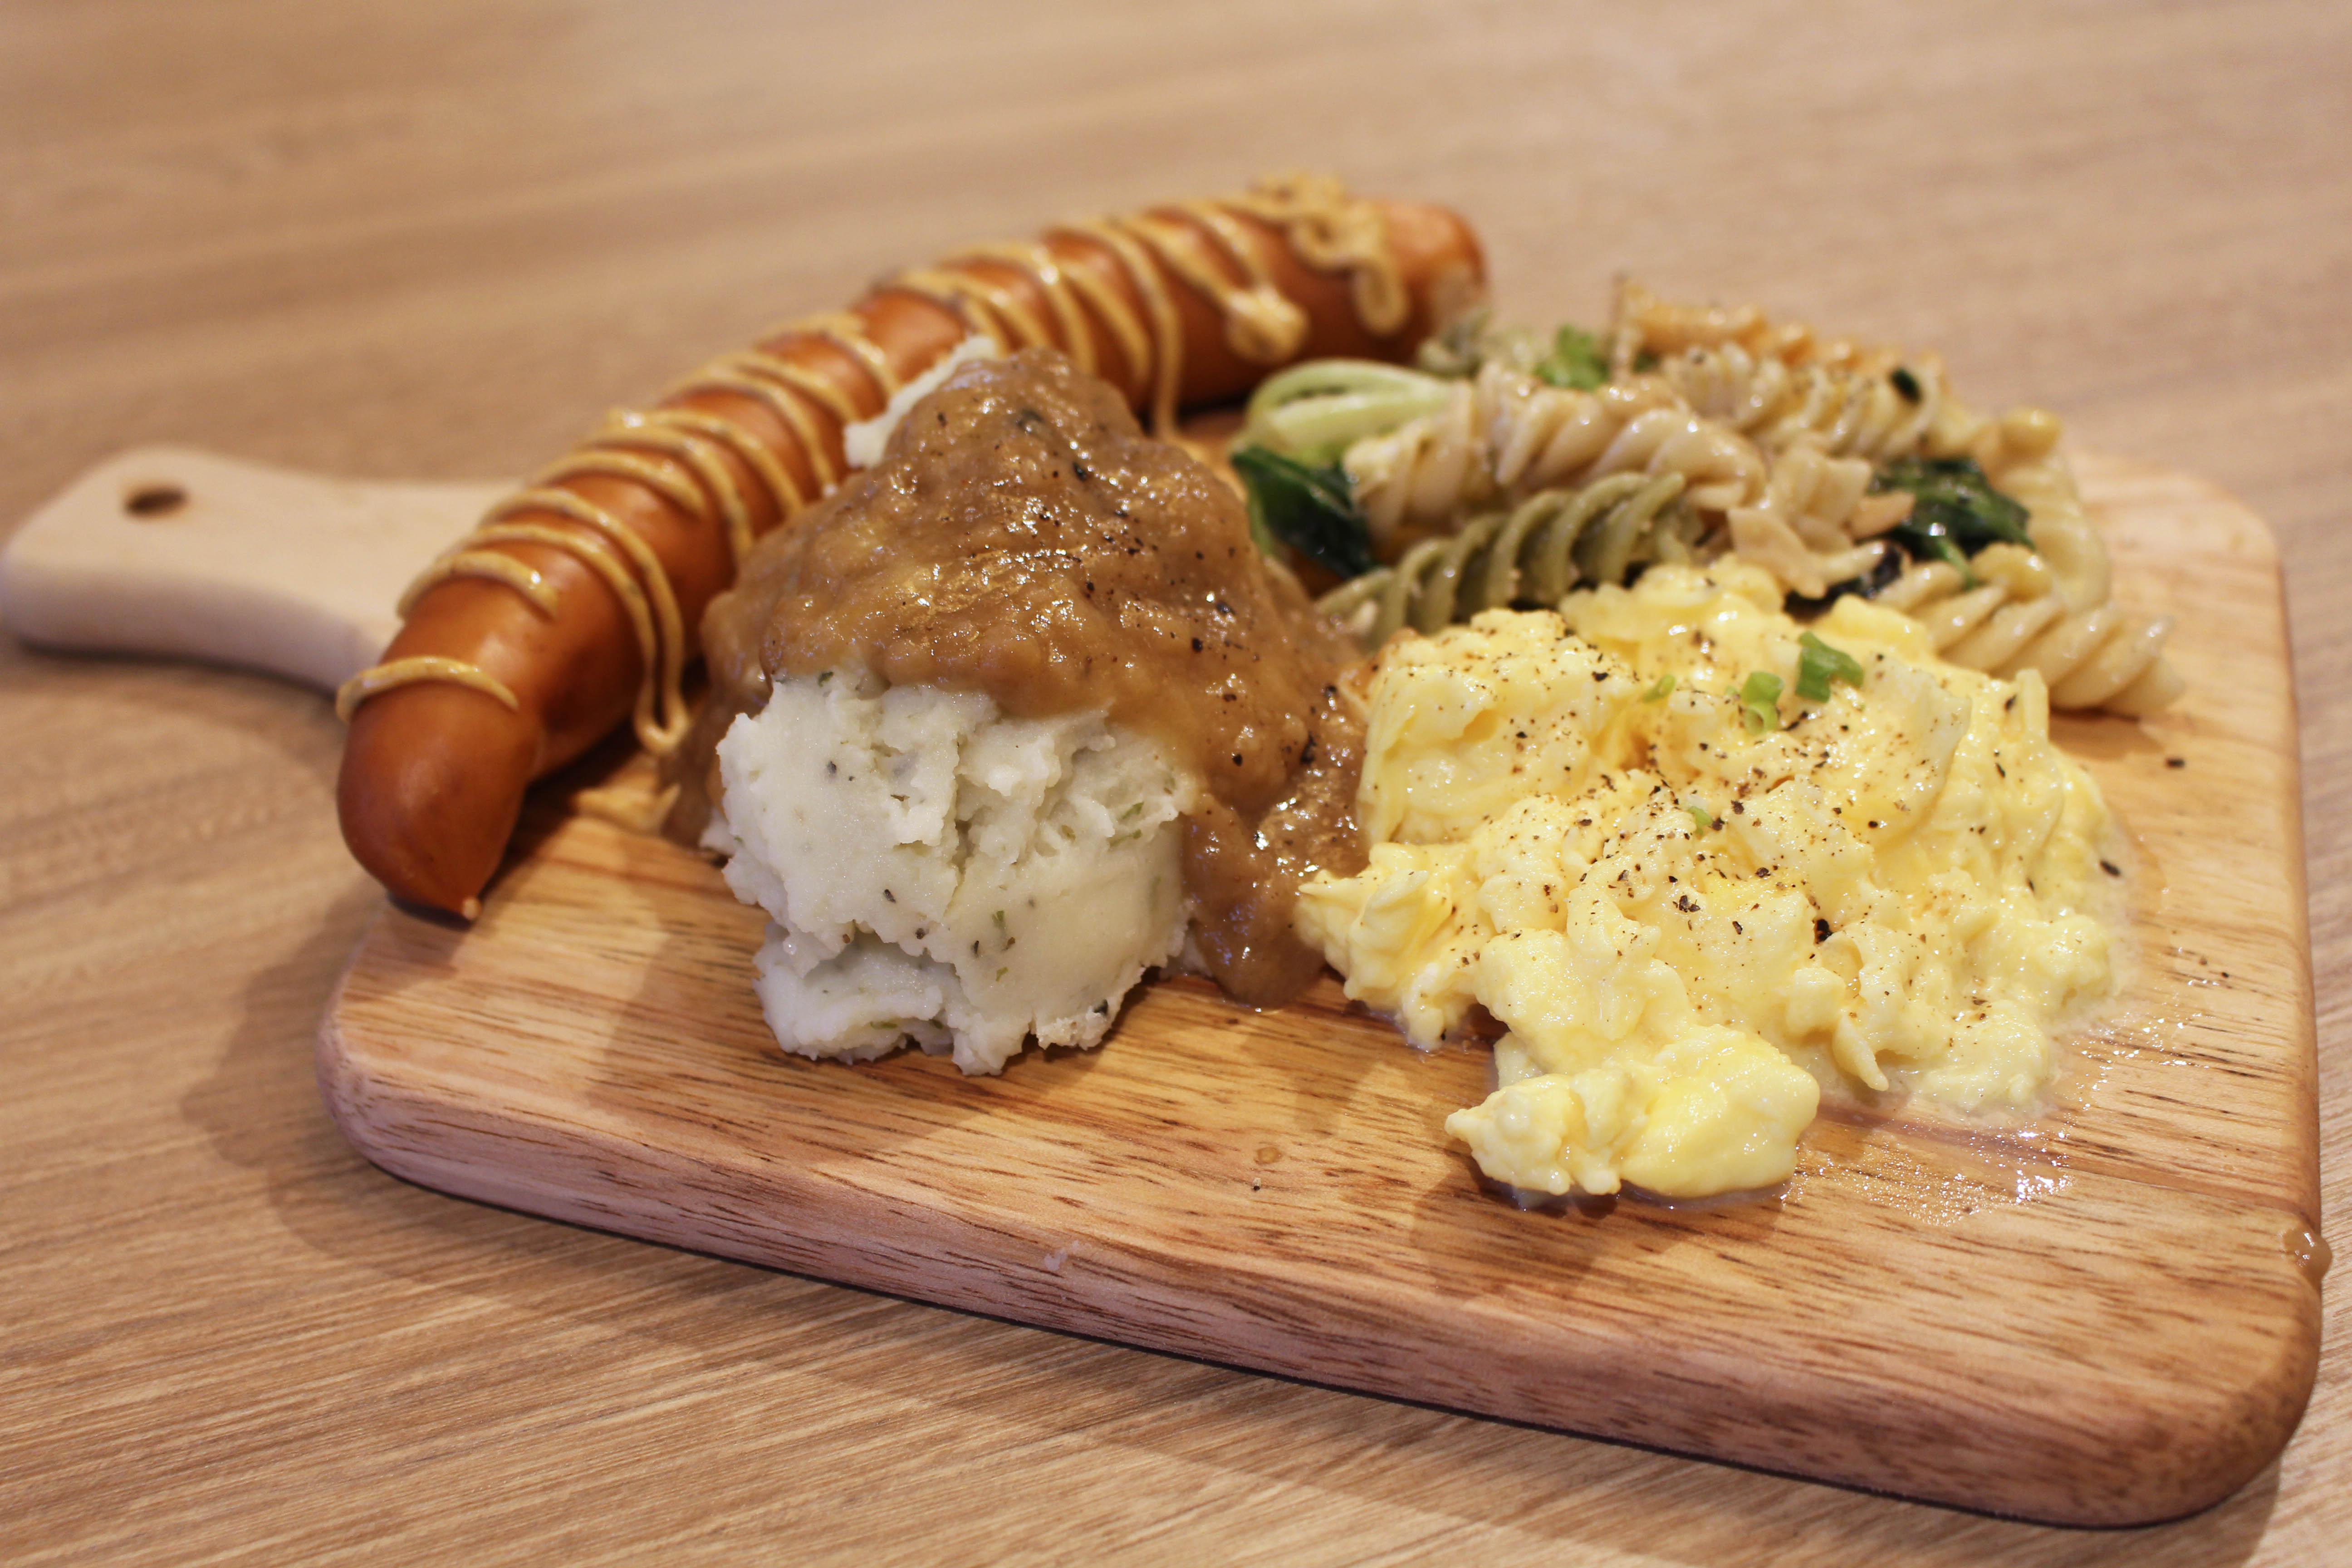 Breakfast Platter with scrambled eggs, mashed potatoes, sausage and pasta salad 